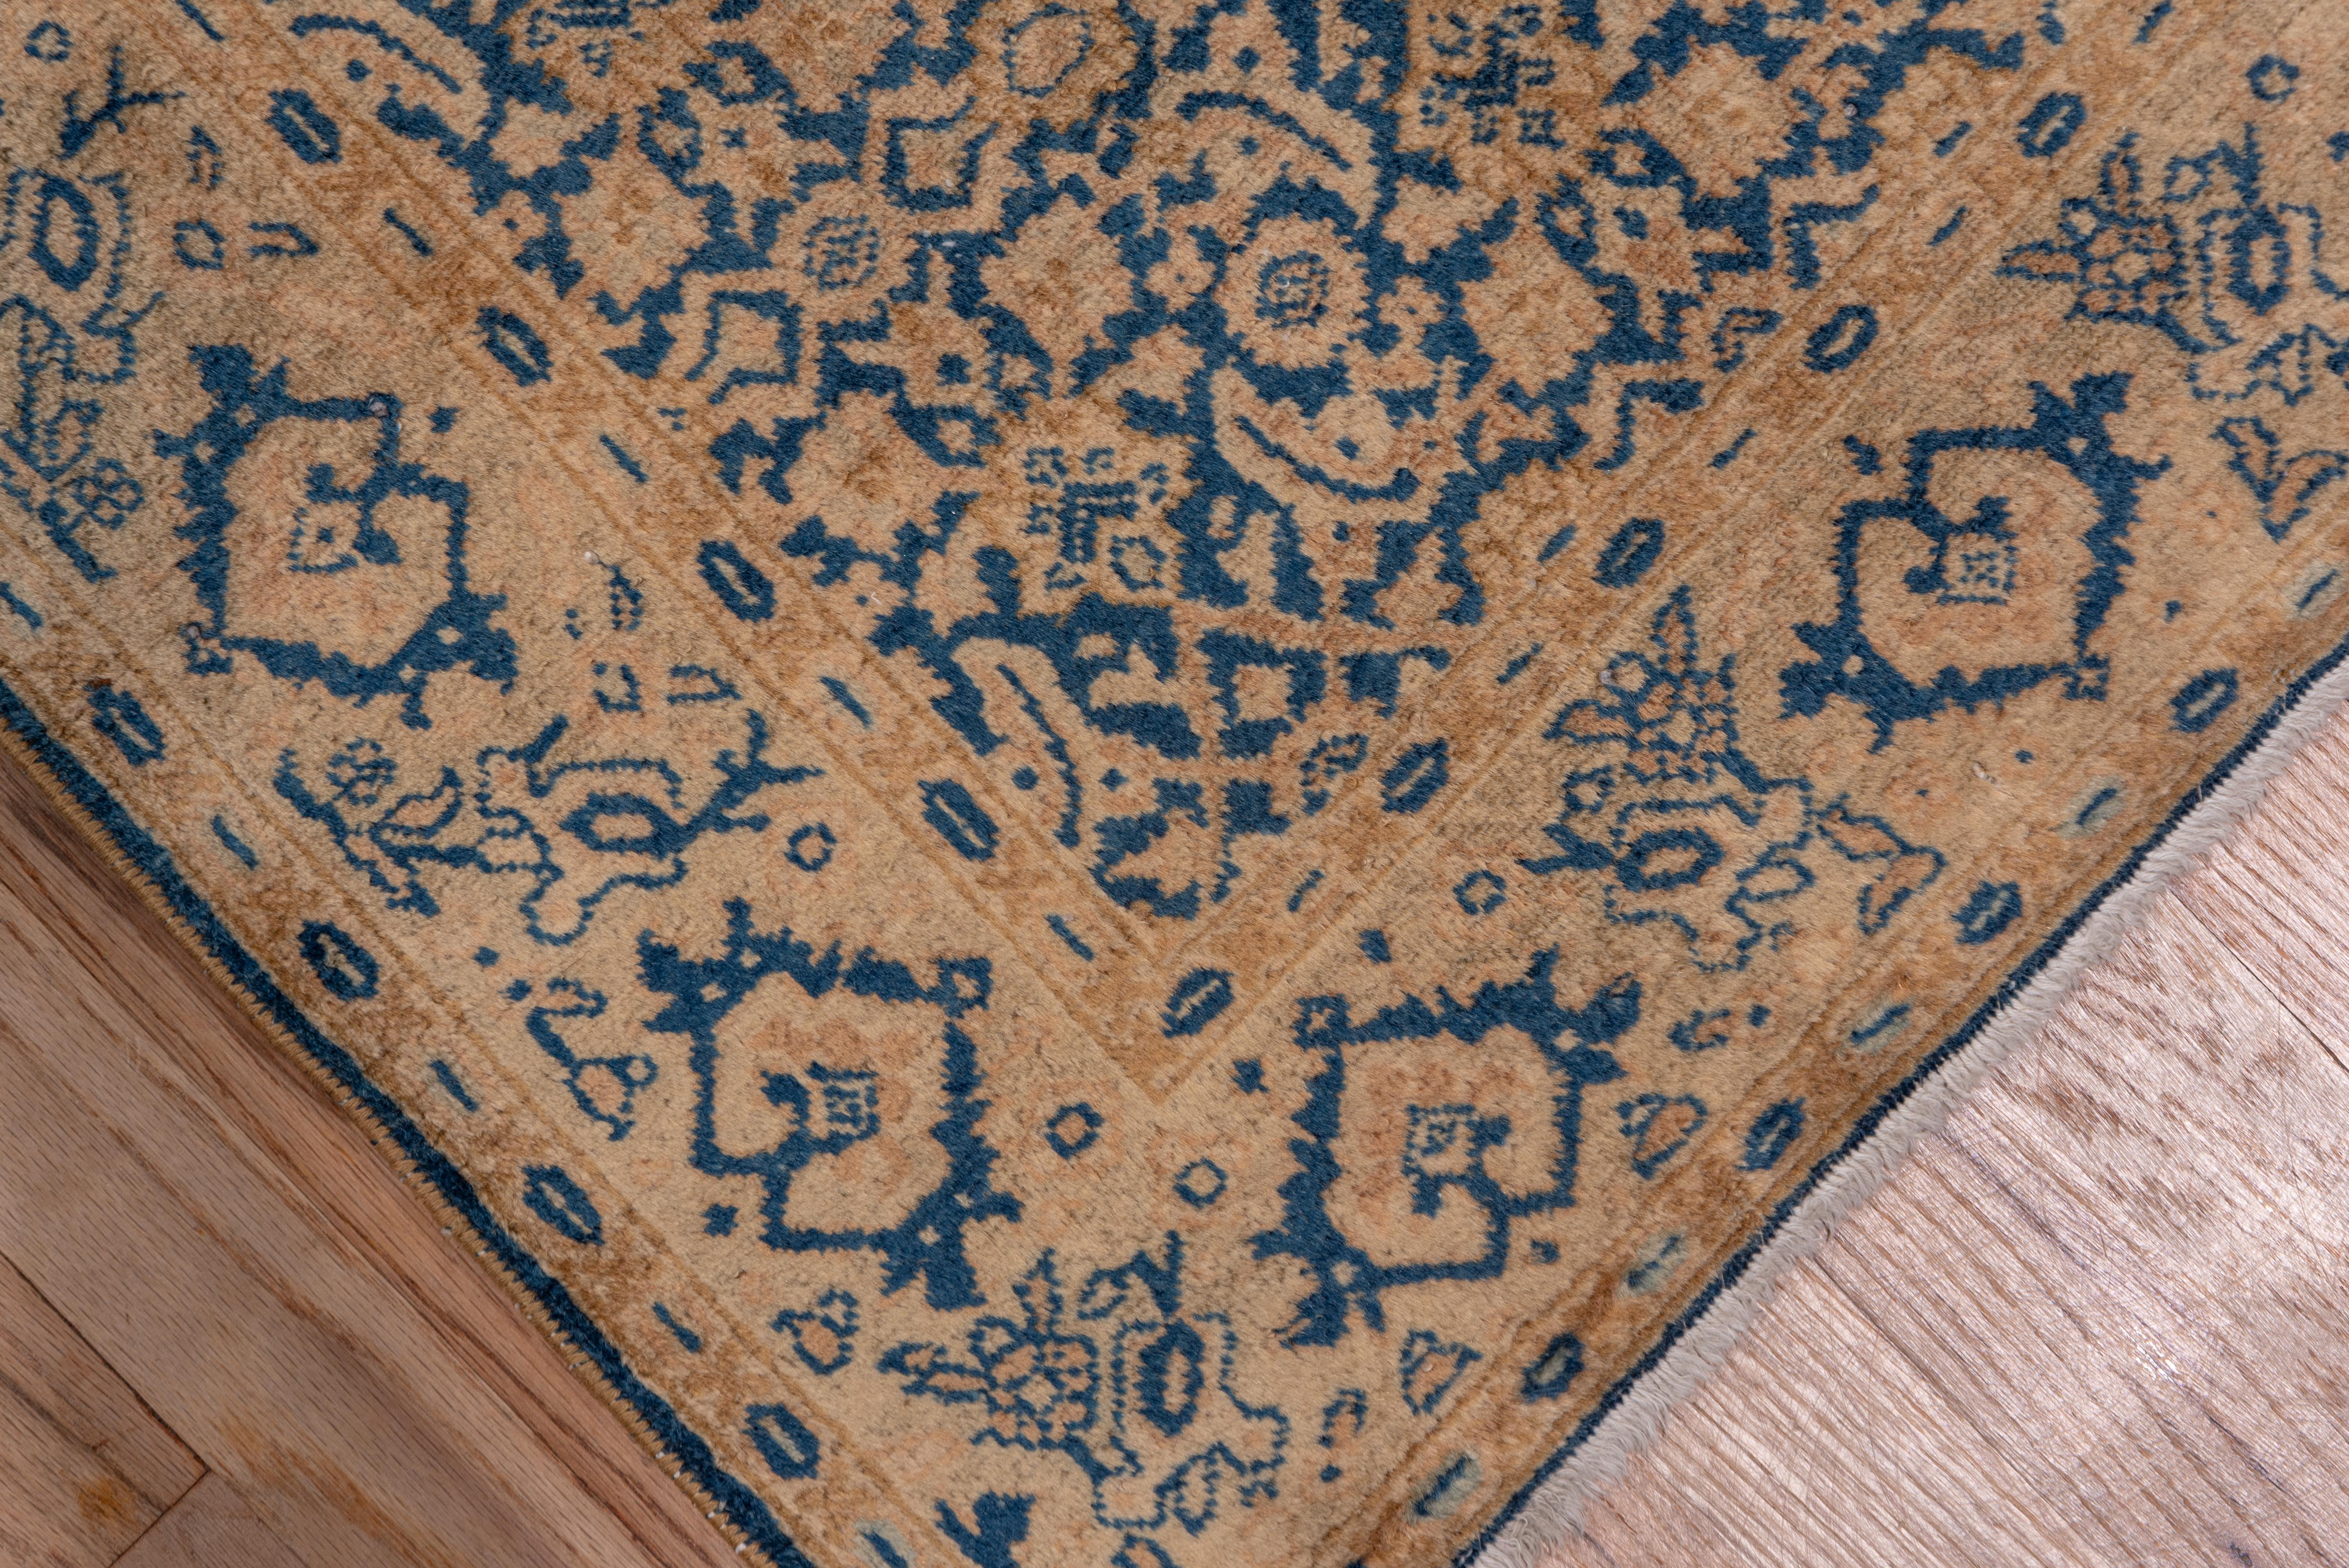 Wool Long and Narrow Antique Persian Tabriz Runner, Blue and Gold Tones, circa 1920s For Sale